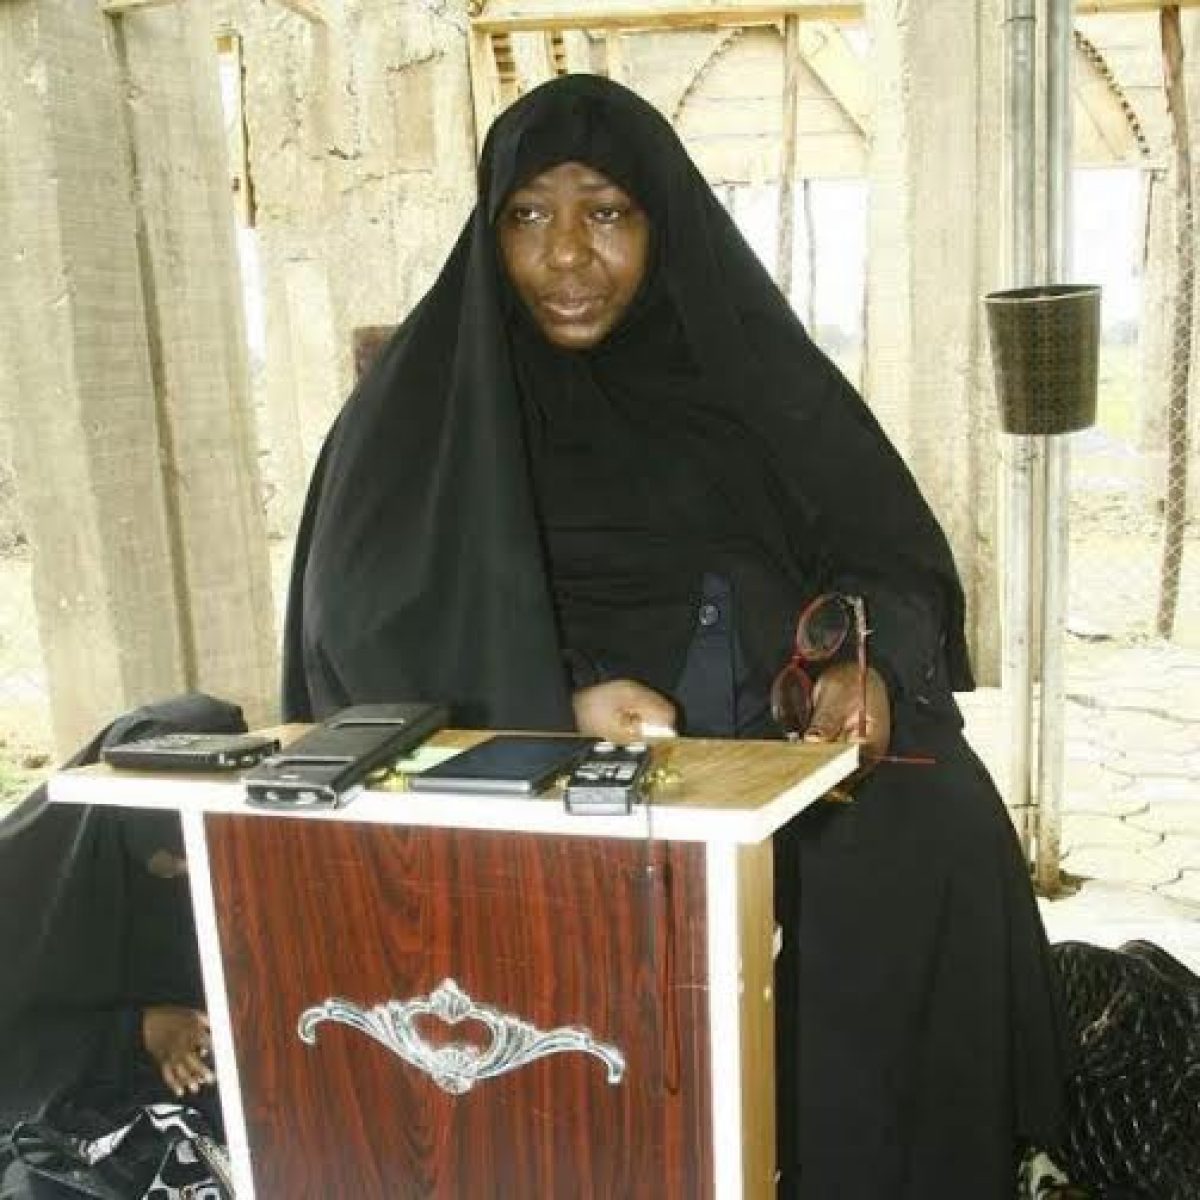 El-Zakzaky’s Wife Has Recovered From COVID-19, Lawyer Tells Court